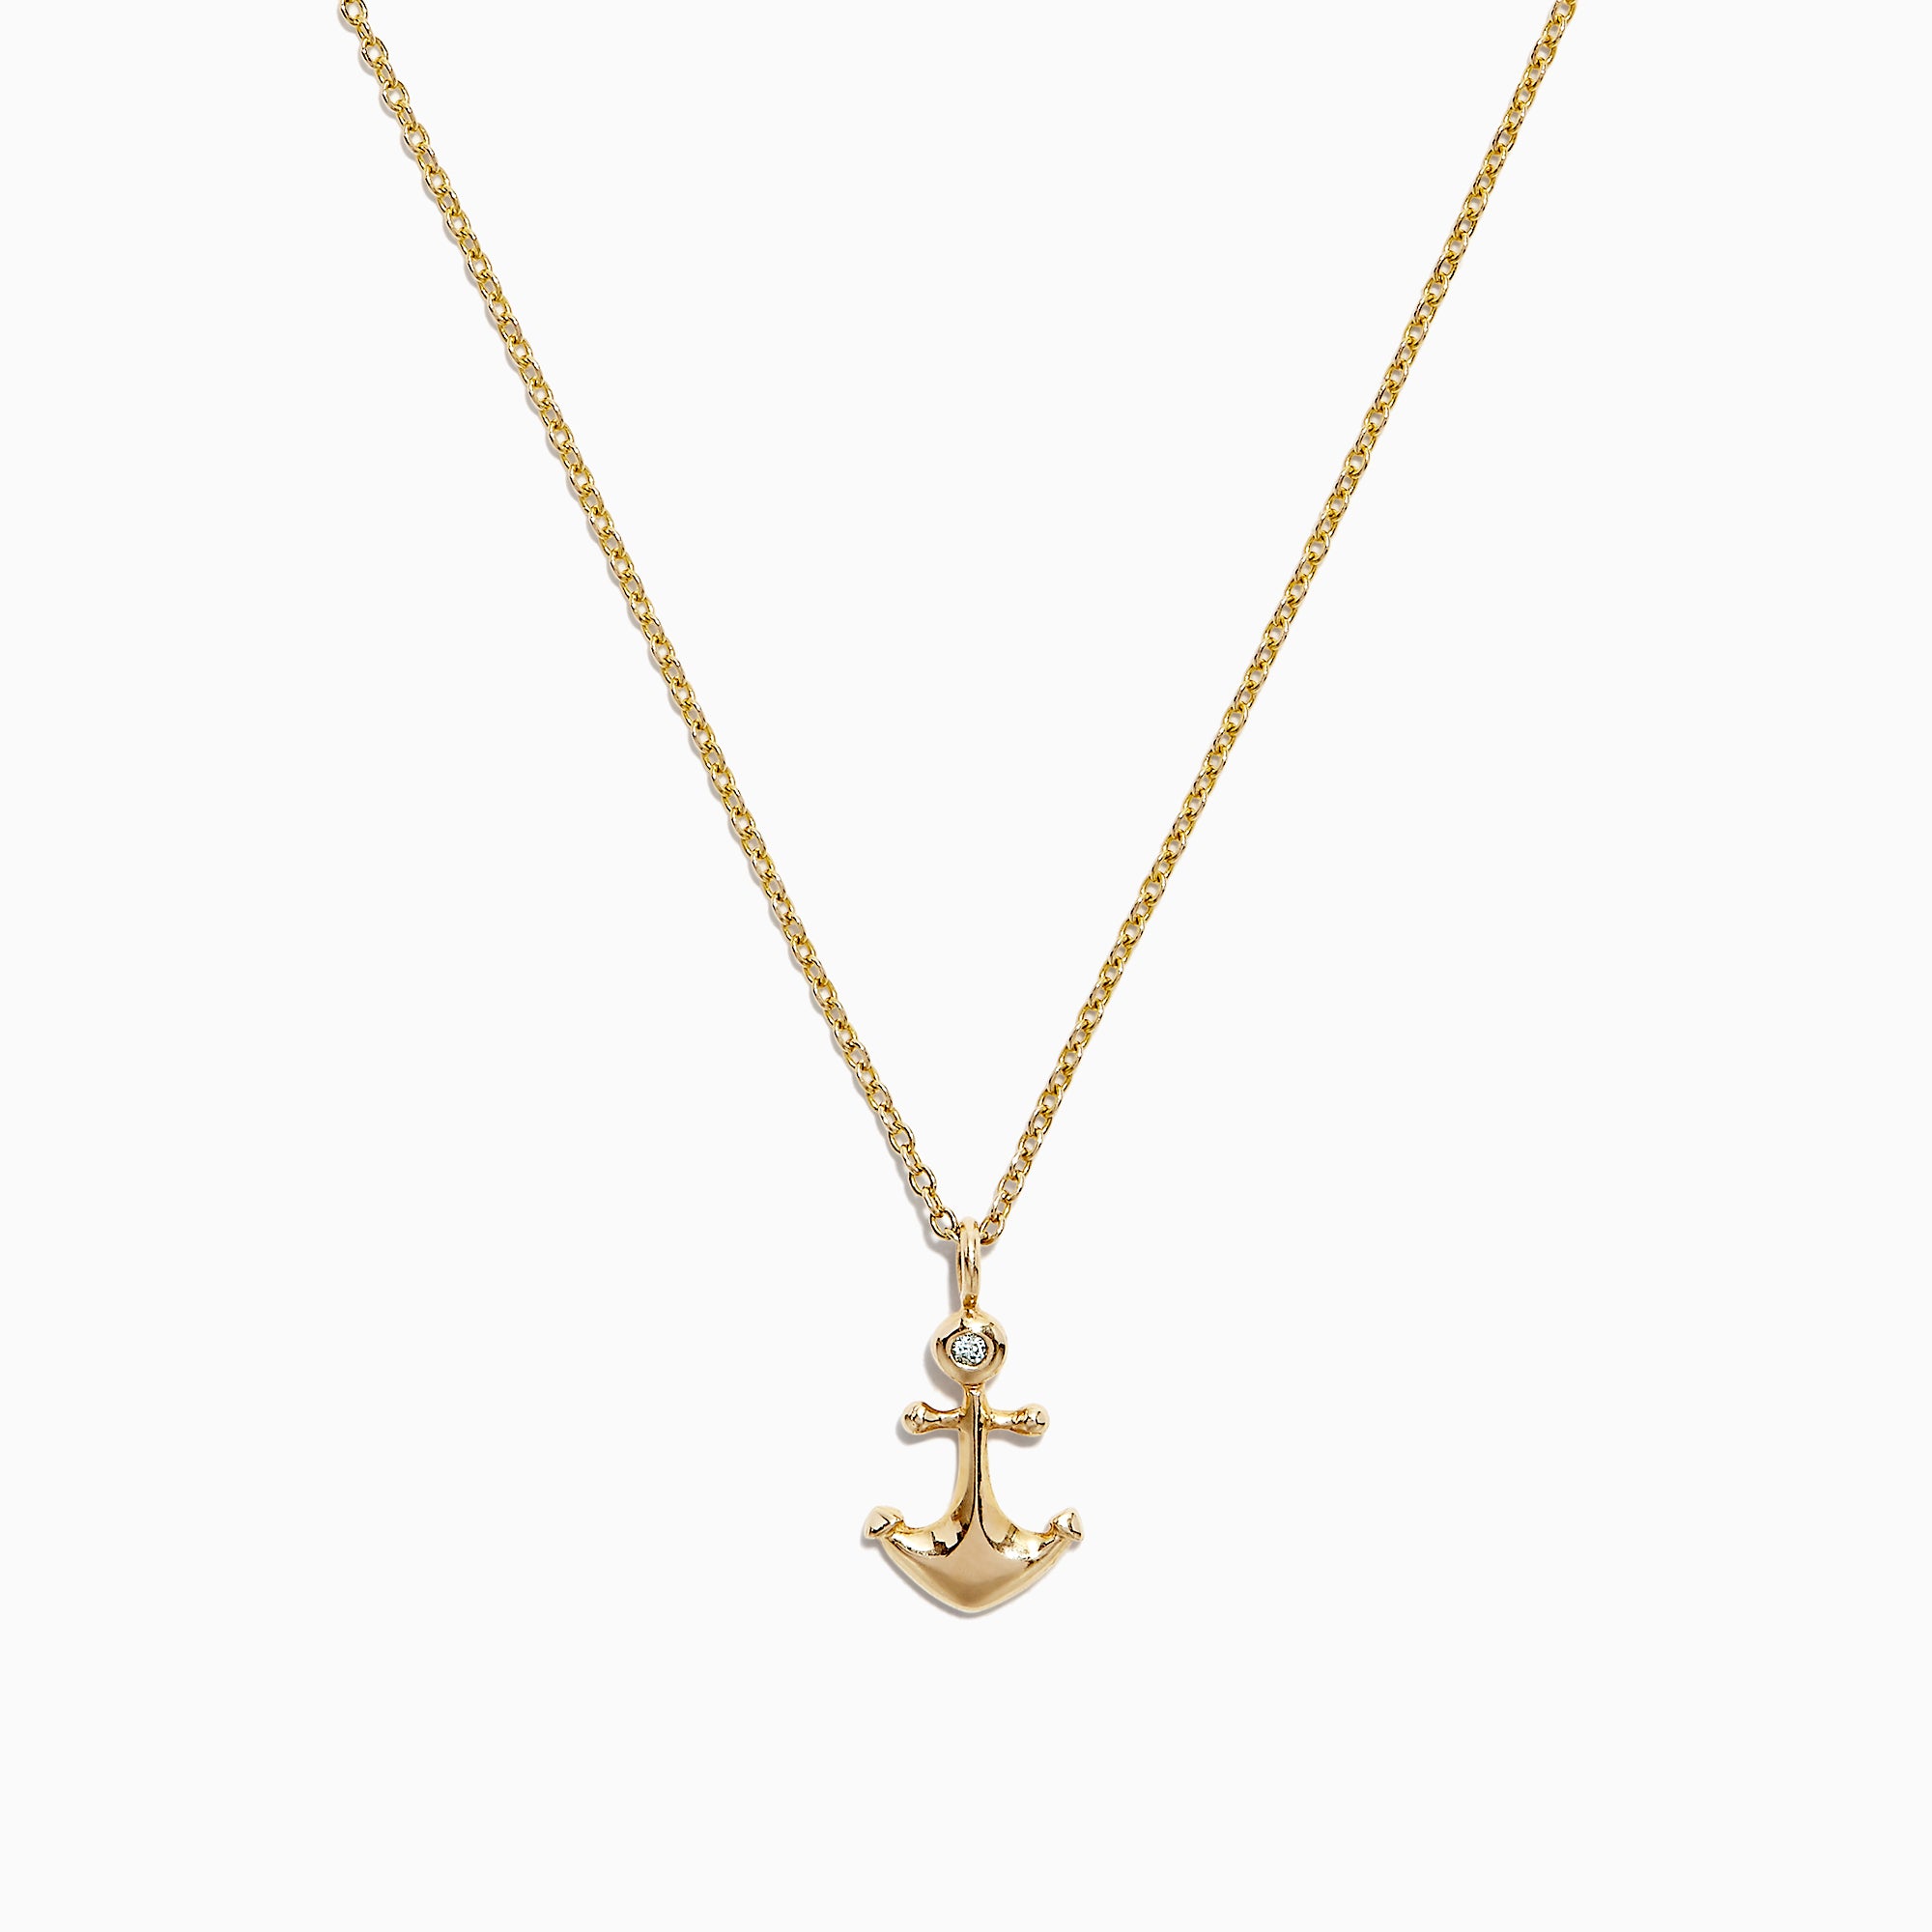 Effy New Jewelry - Silver Nautical Anchor Pendant & Chain Necklace - $12 -  From Danielle